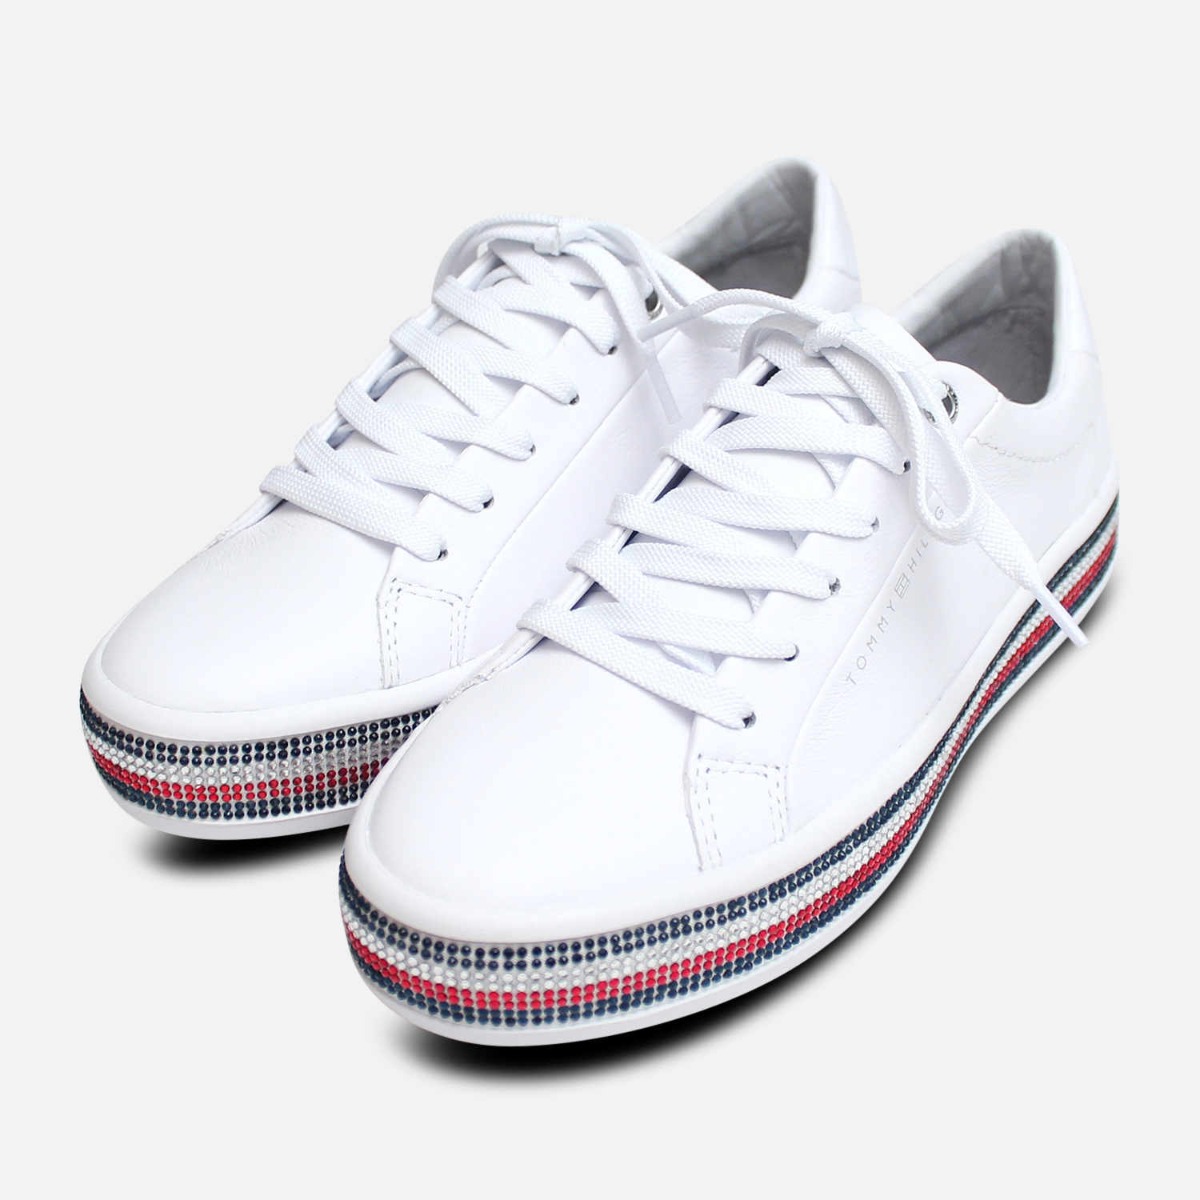 tommy hilfiger sparkle sneakers